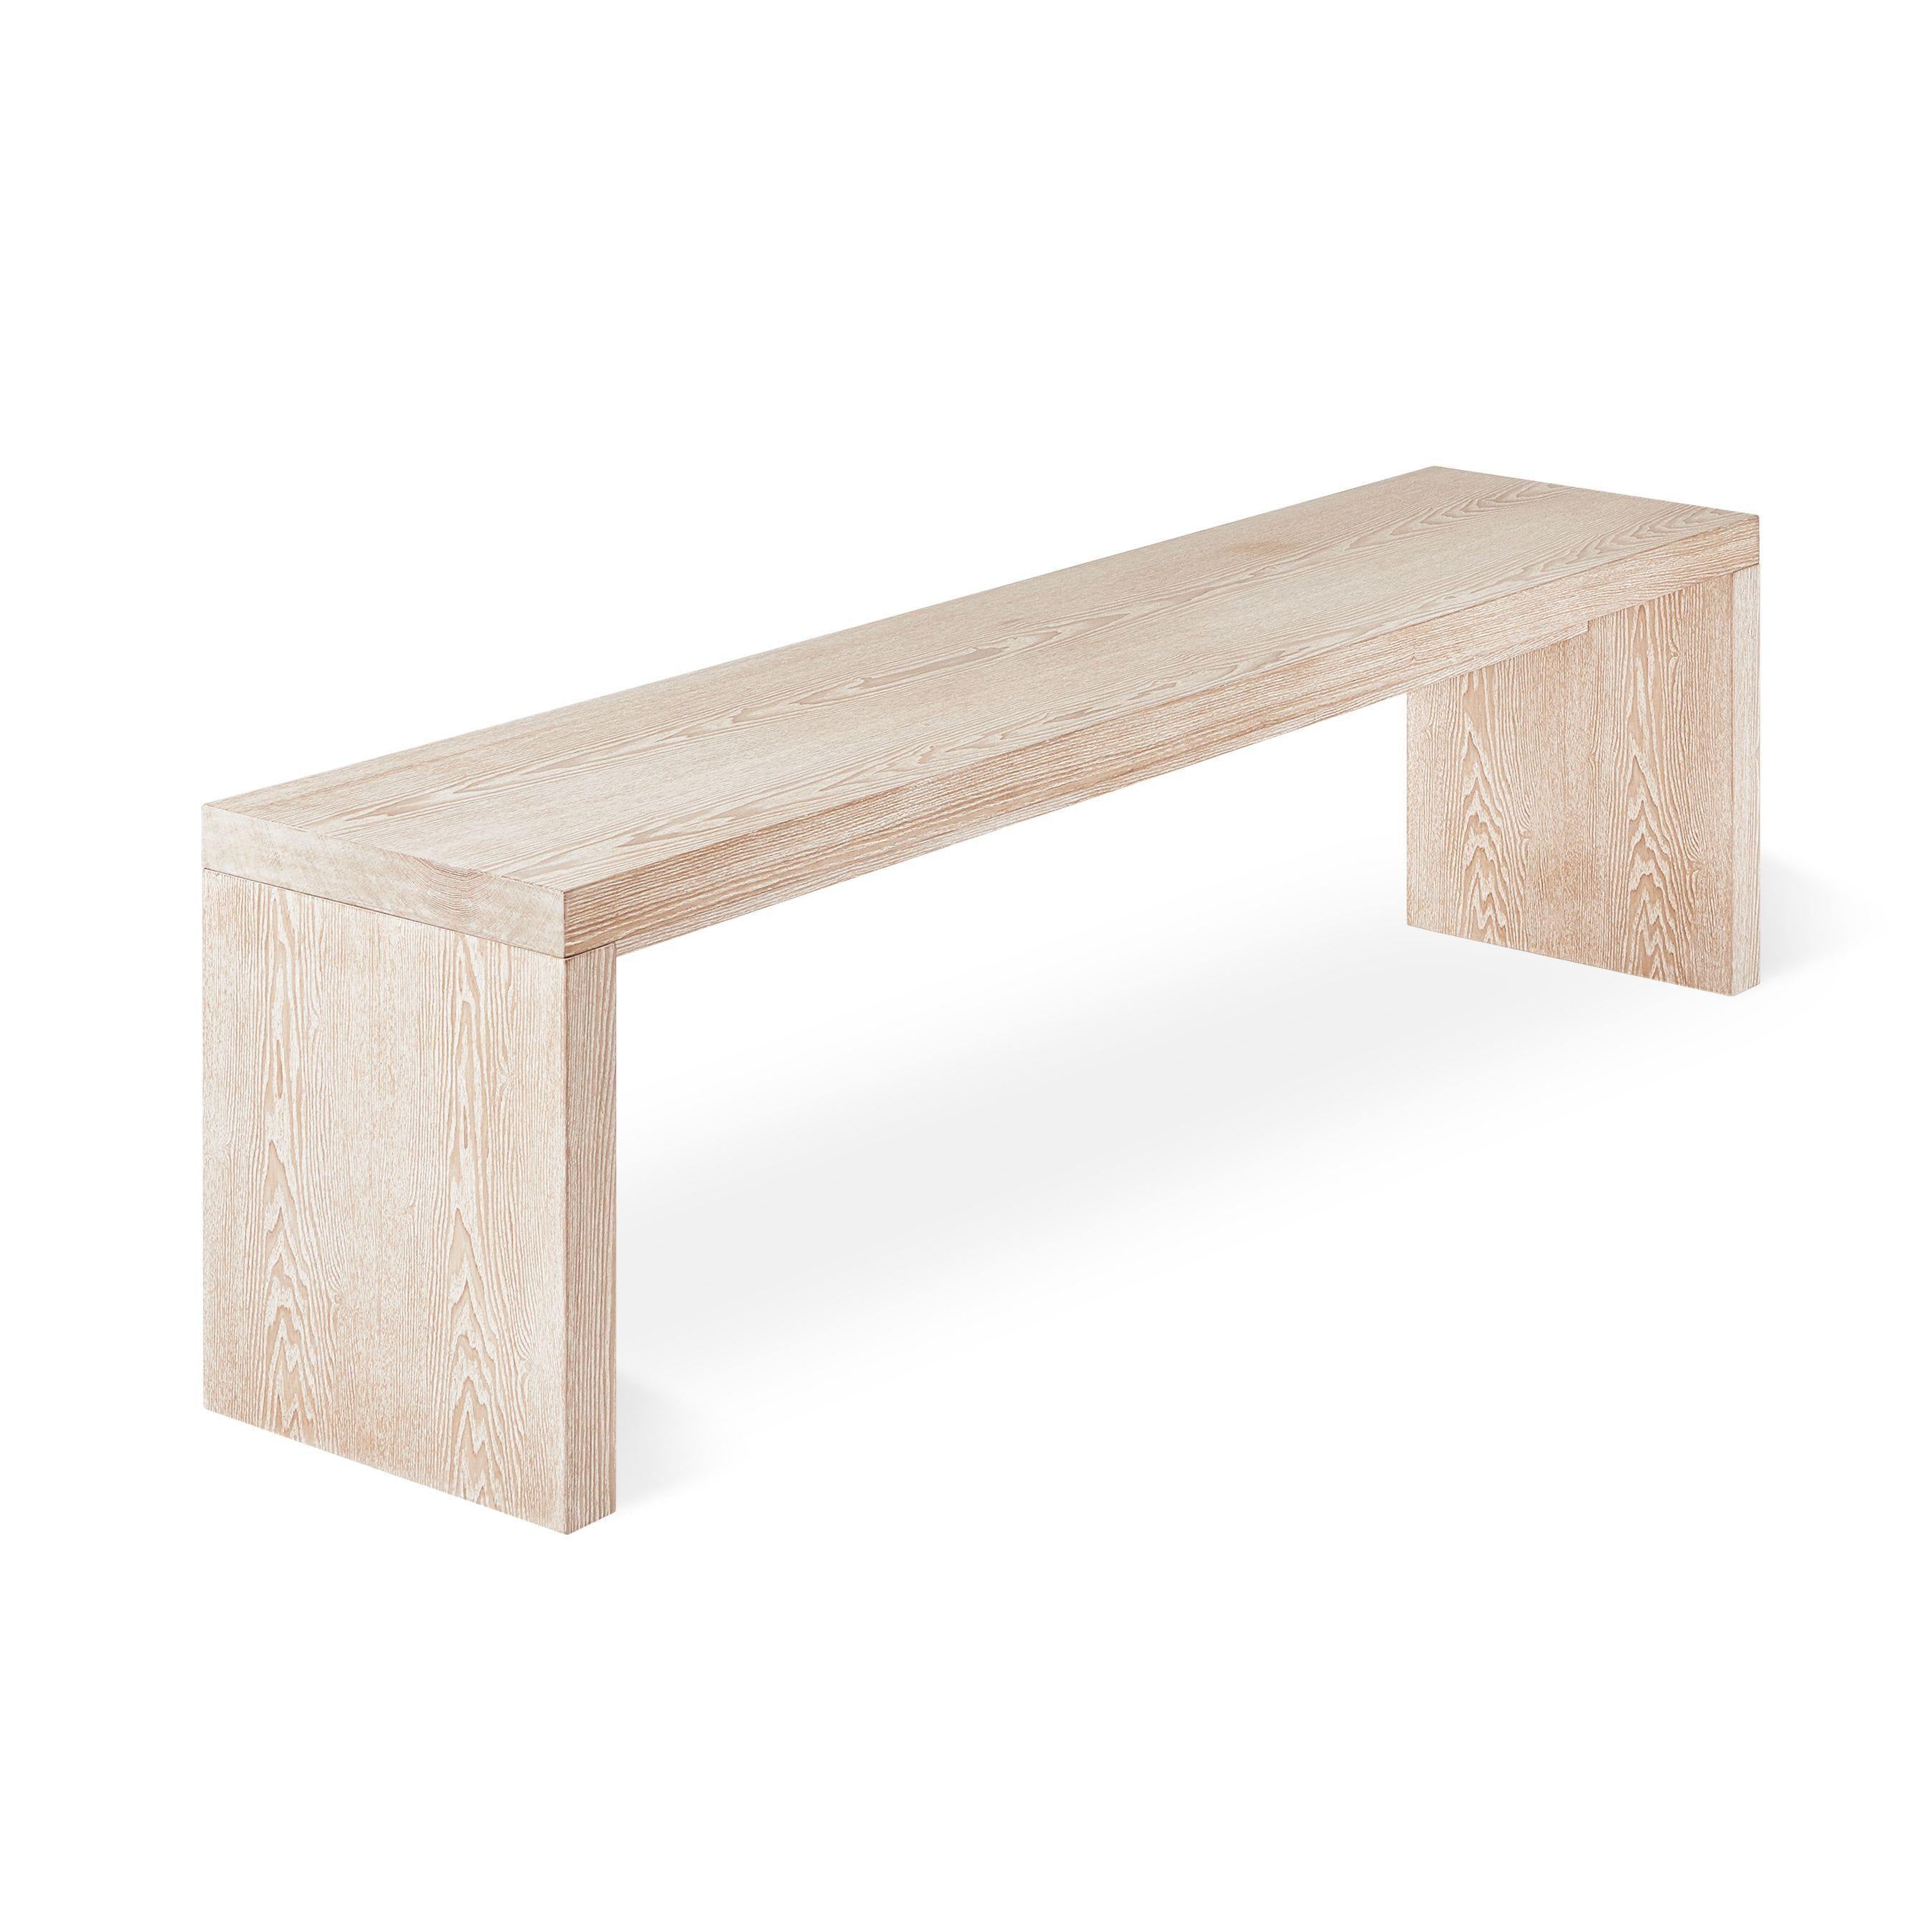 Plank Dining Bench White Wash Ash - DIGS